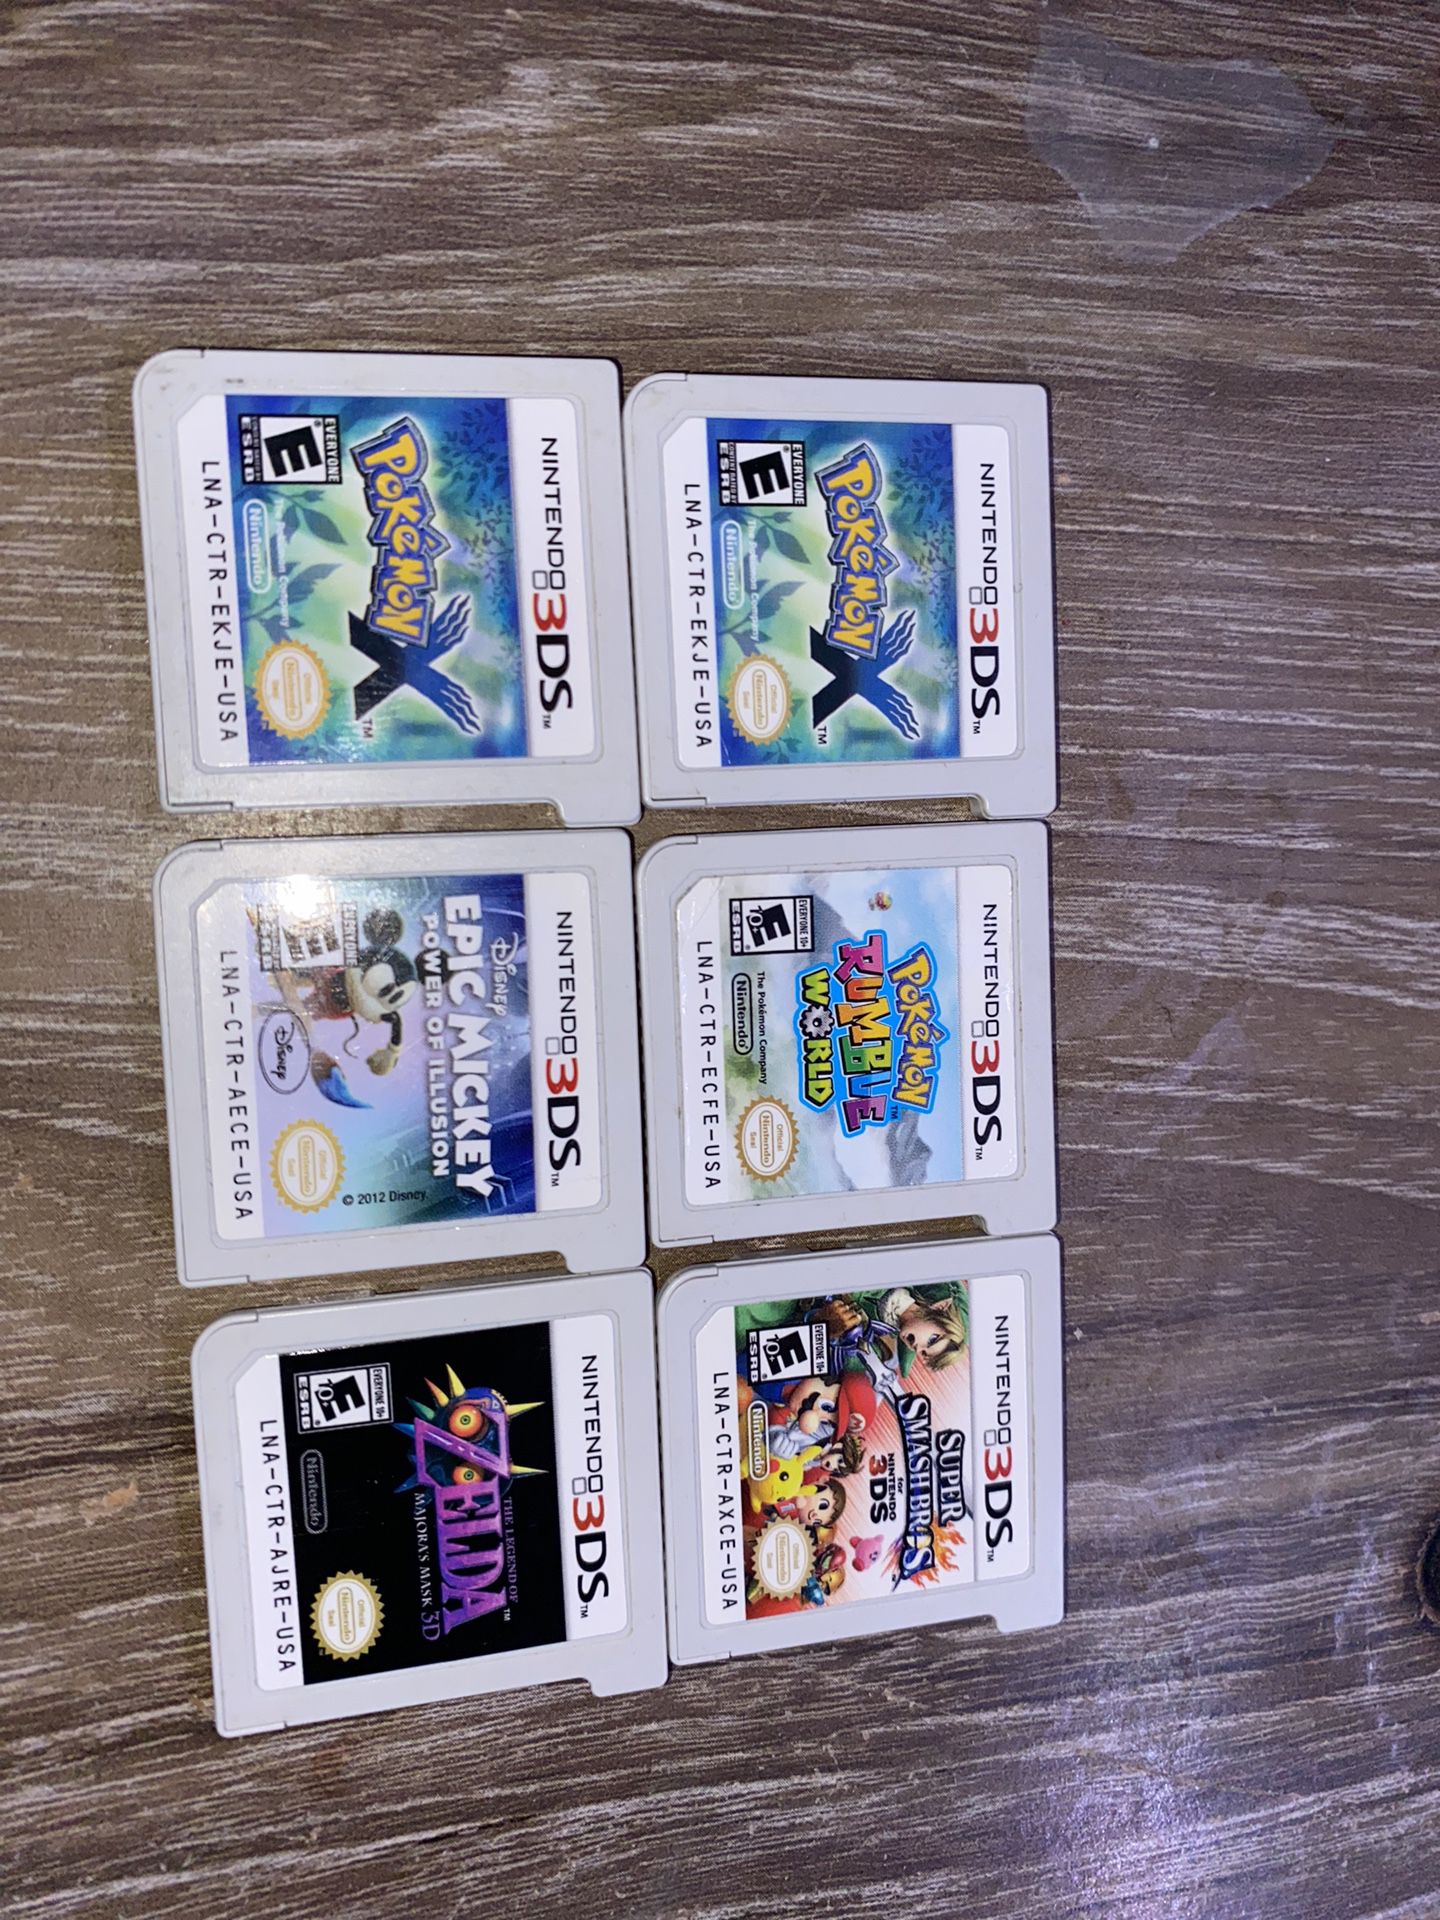 3DS Games